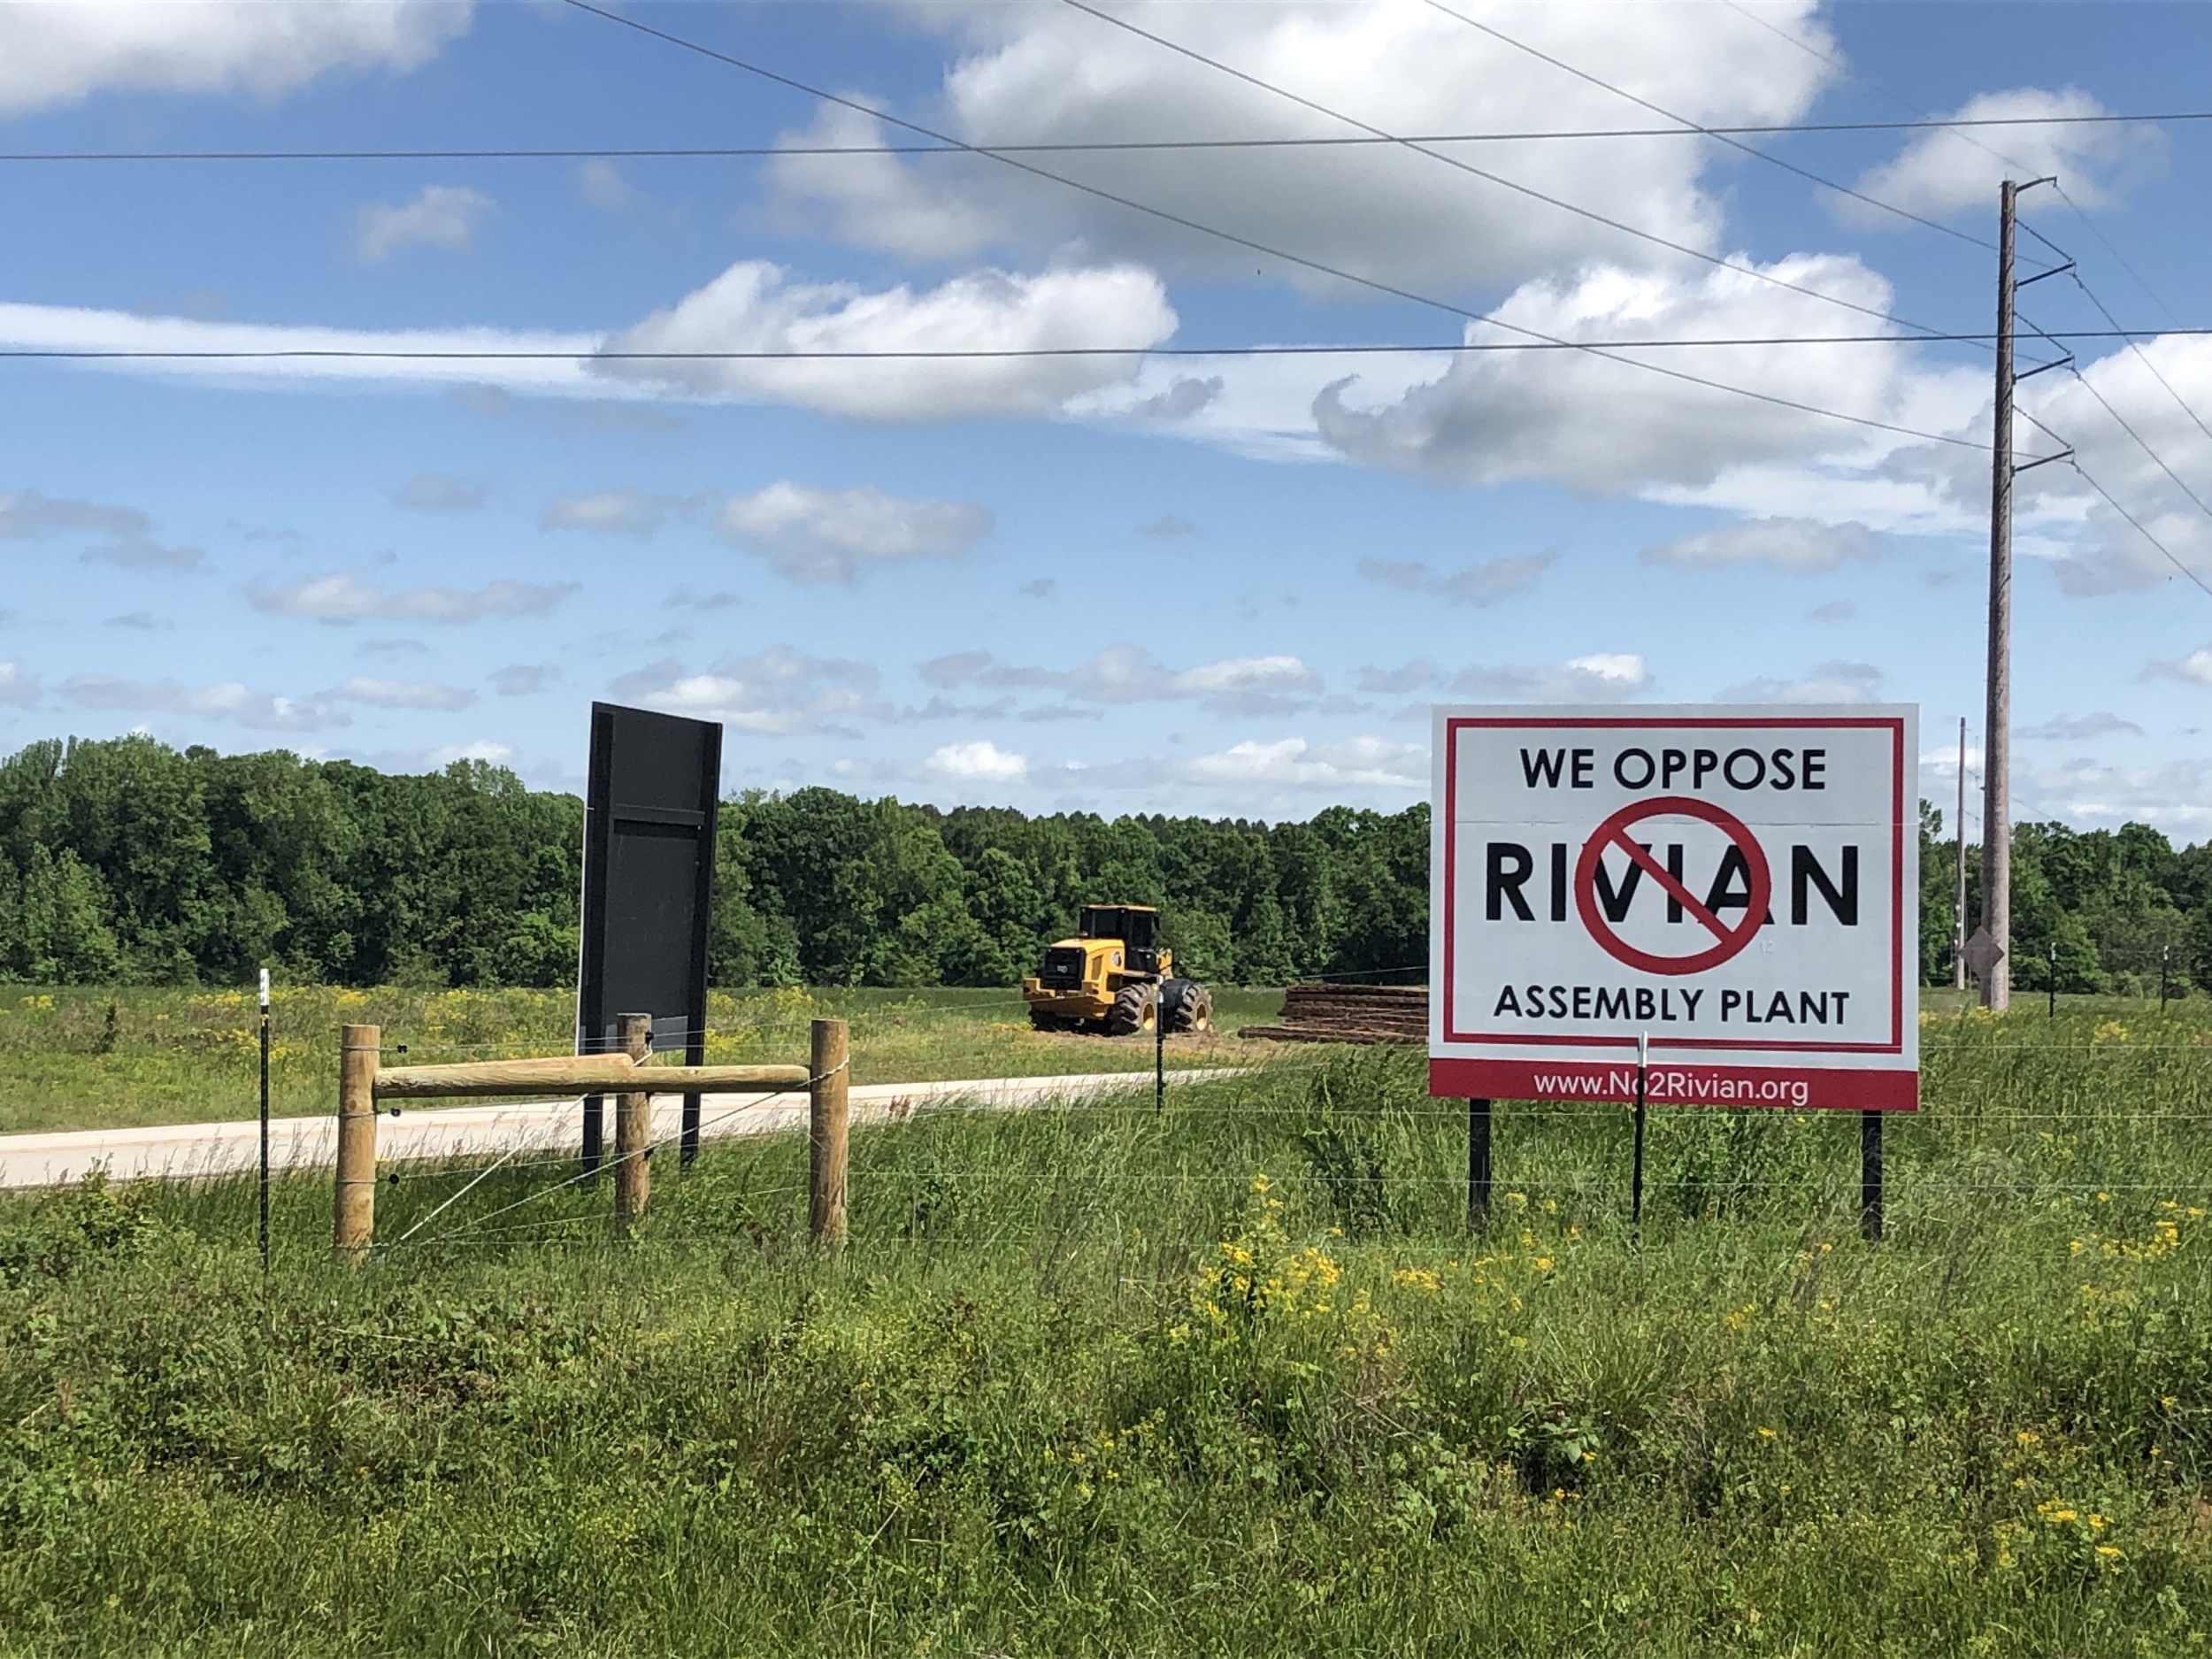 The image shows a field with a yellow bulldozer in the background and a white and red sign in the foreground that reads, "We Oppose Rivian Assembly Plant." The field is also offset by a blue sky with white clouds.